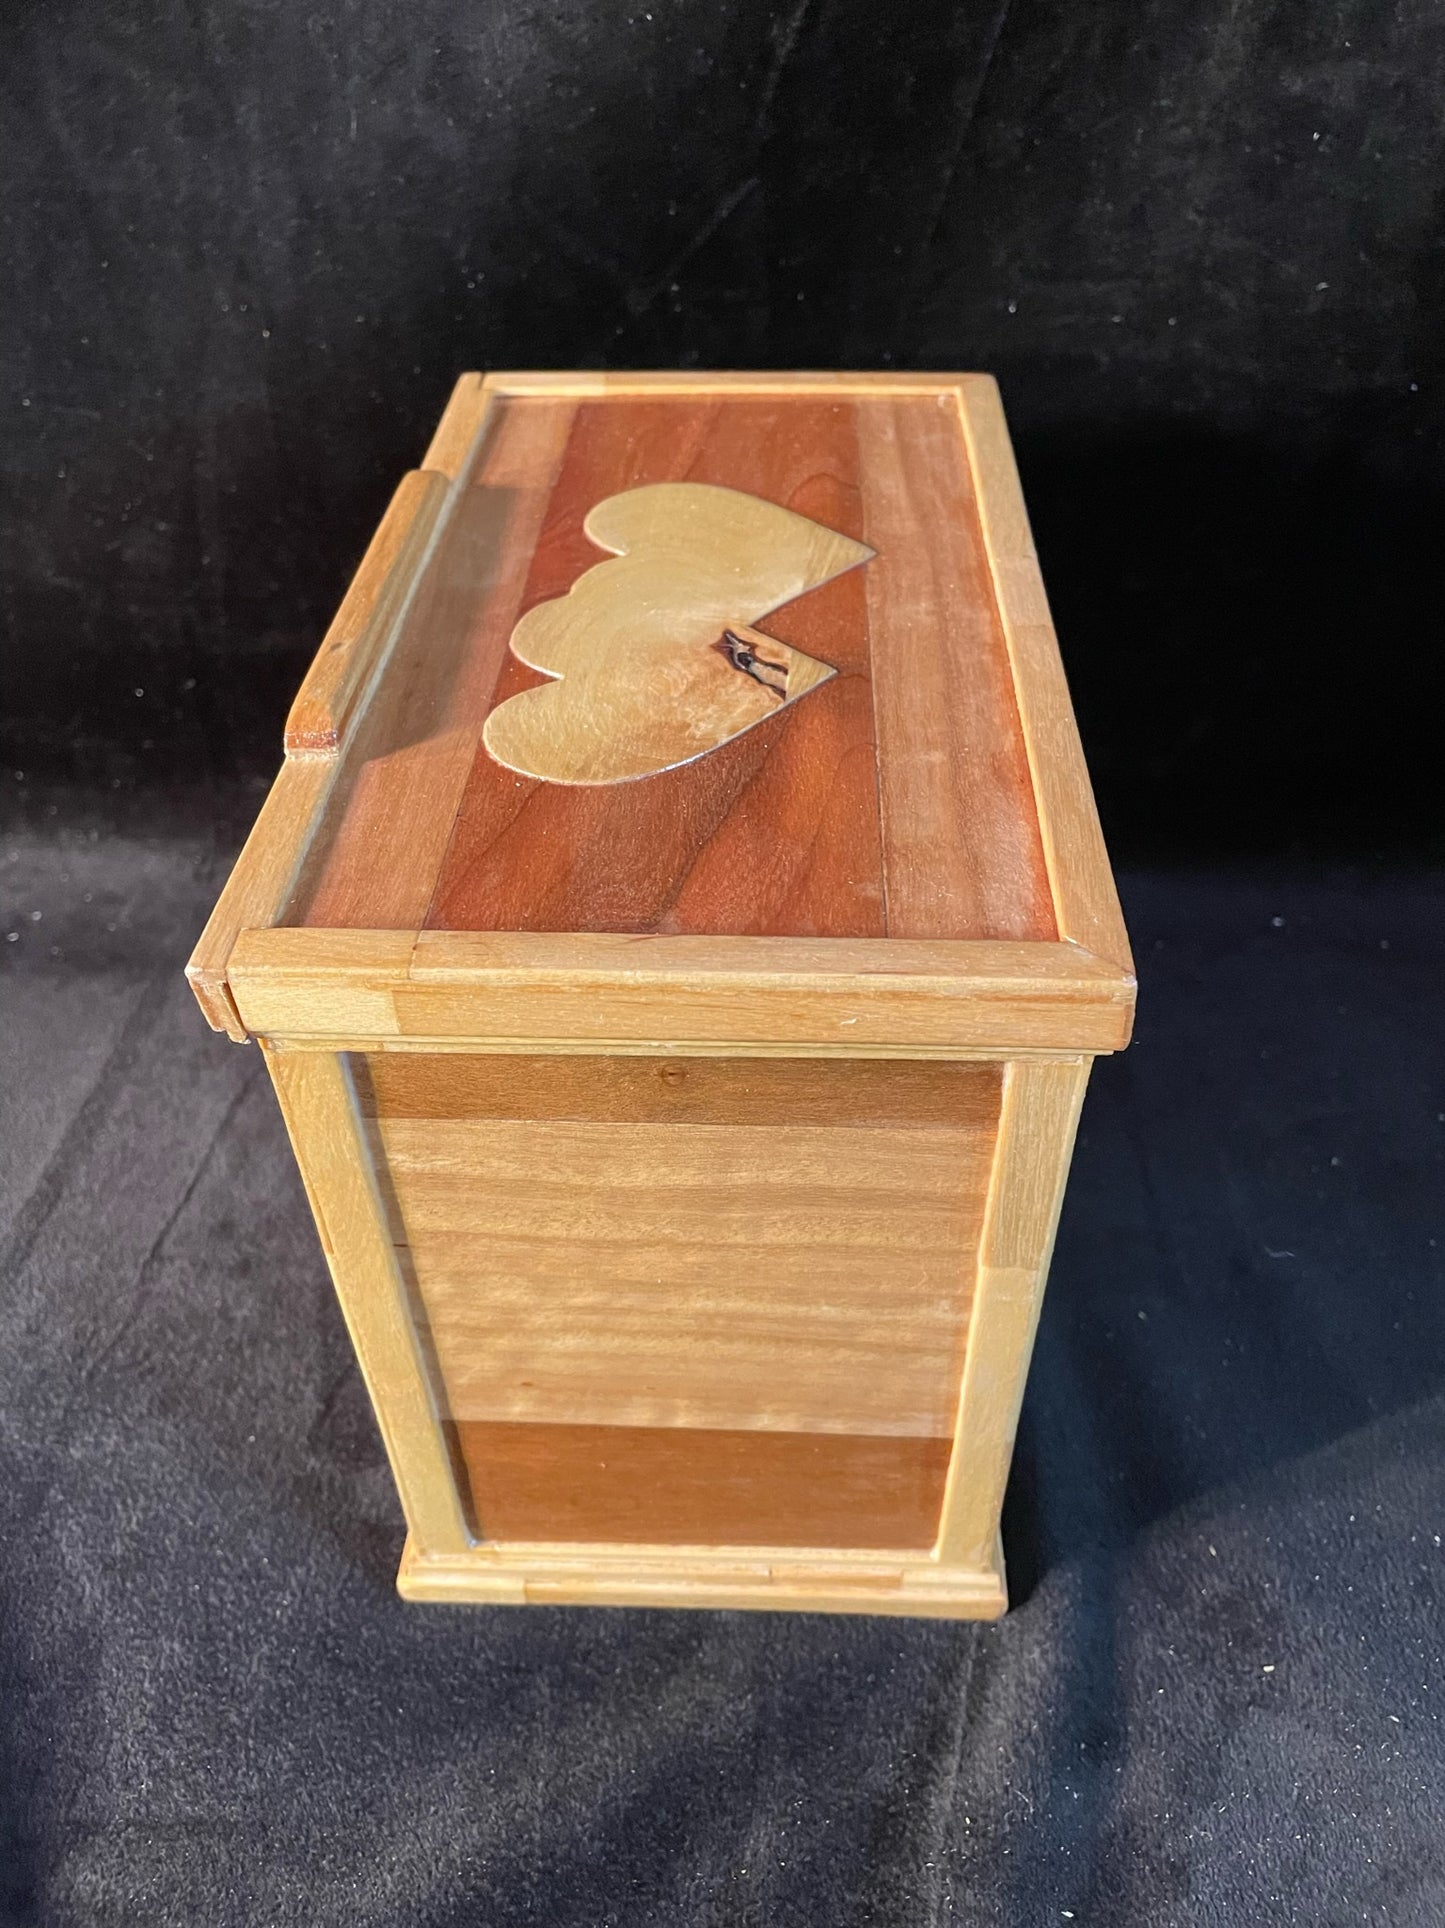 Wooded Heart Jewelry Box With Pink Drawers